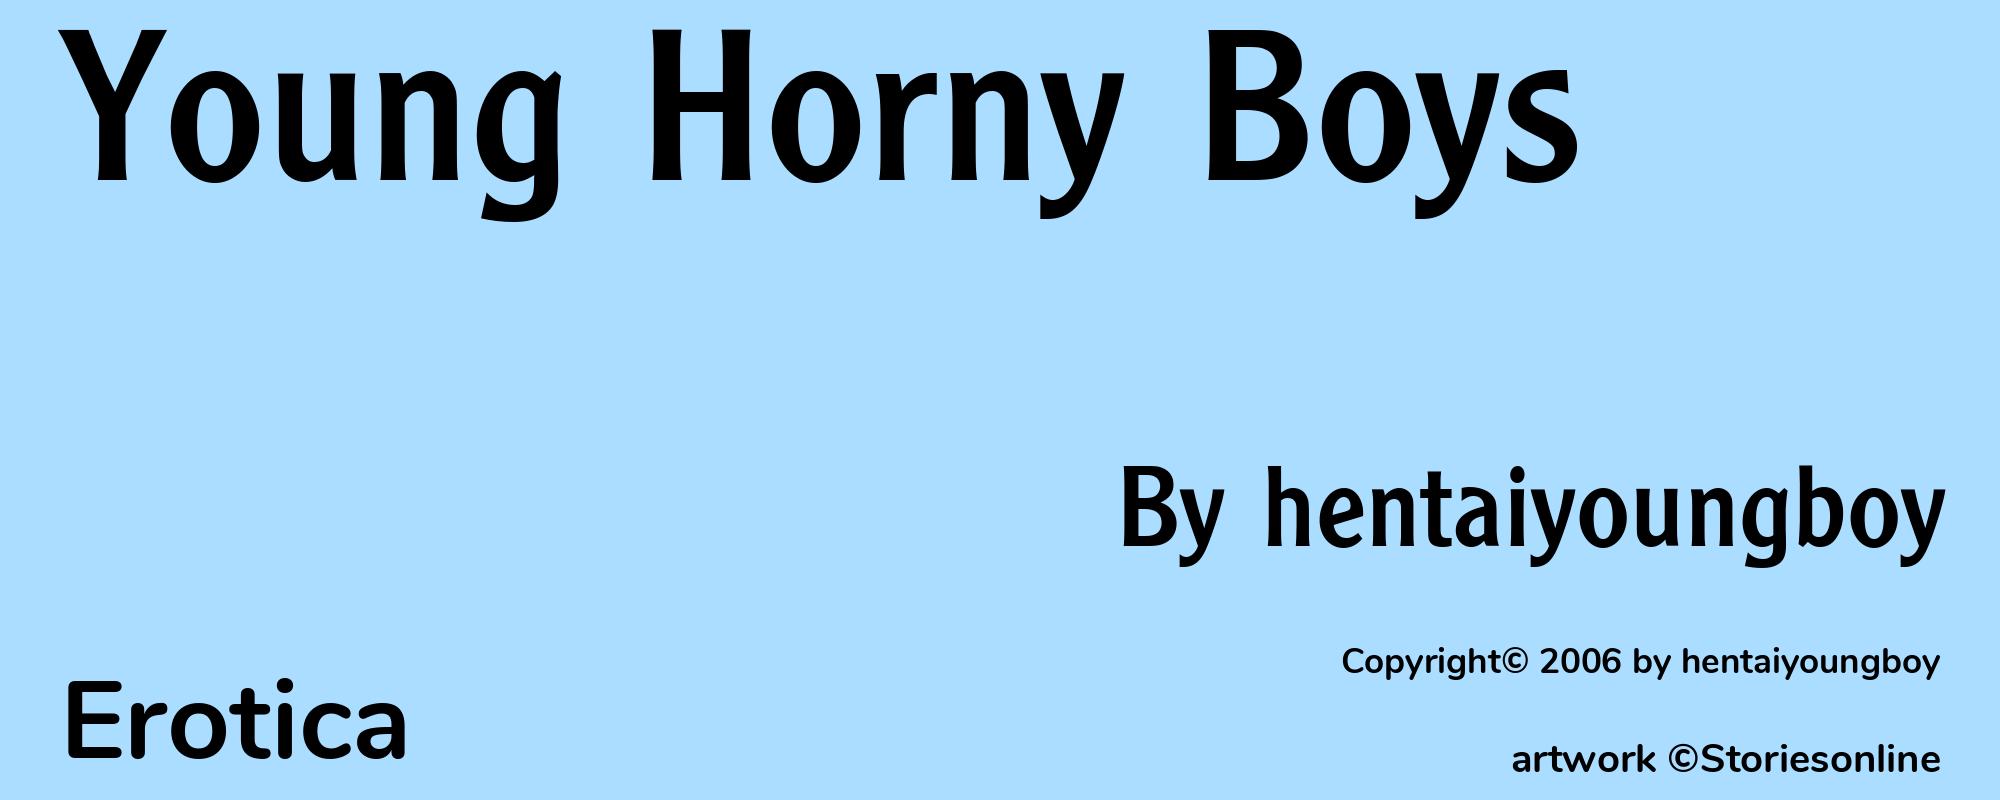 Young Horny Boys - Cover